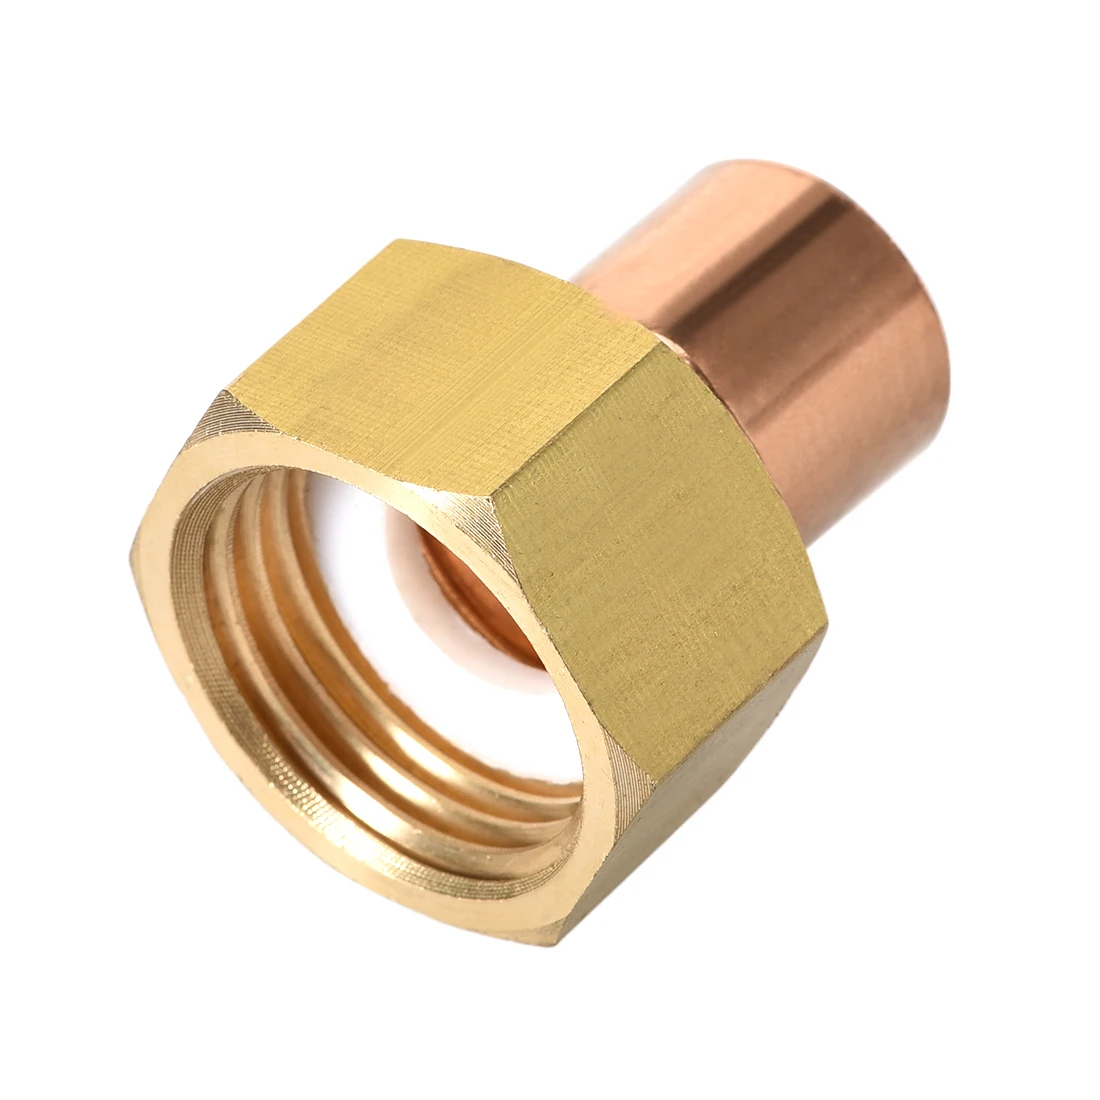 

uxcell G1/2 Lead Free Copper Union Fitting with Sweat Solder Joint to Male Threaded Connects for Use 12.7mm Nominal Size Pipes